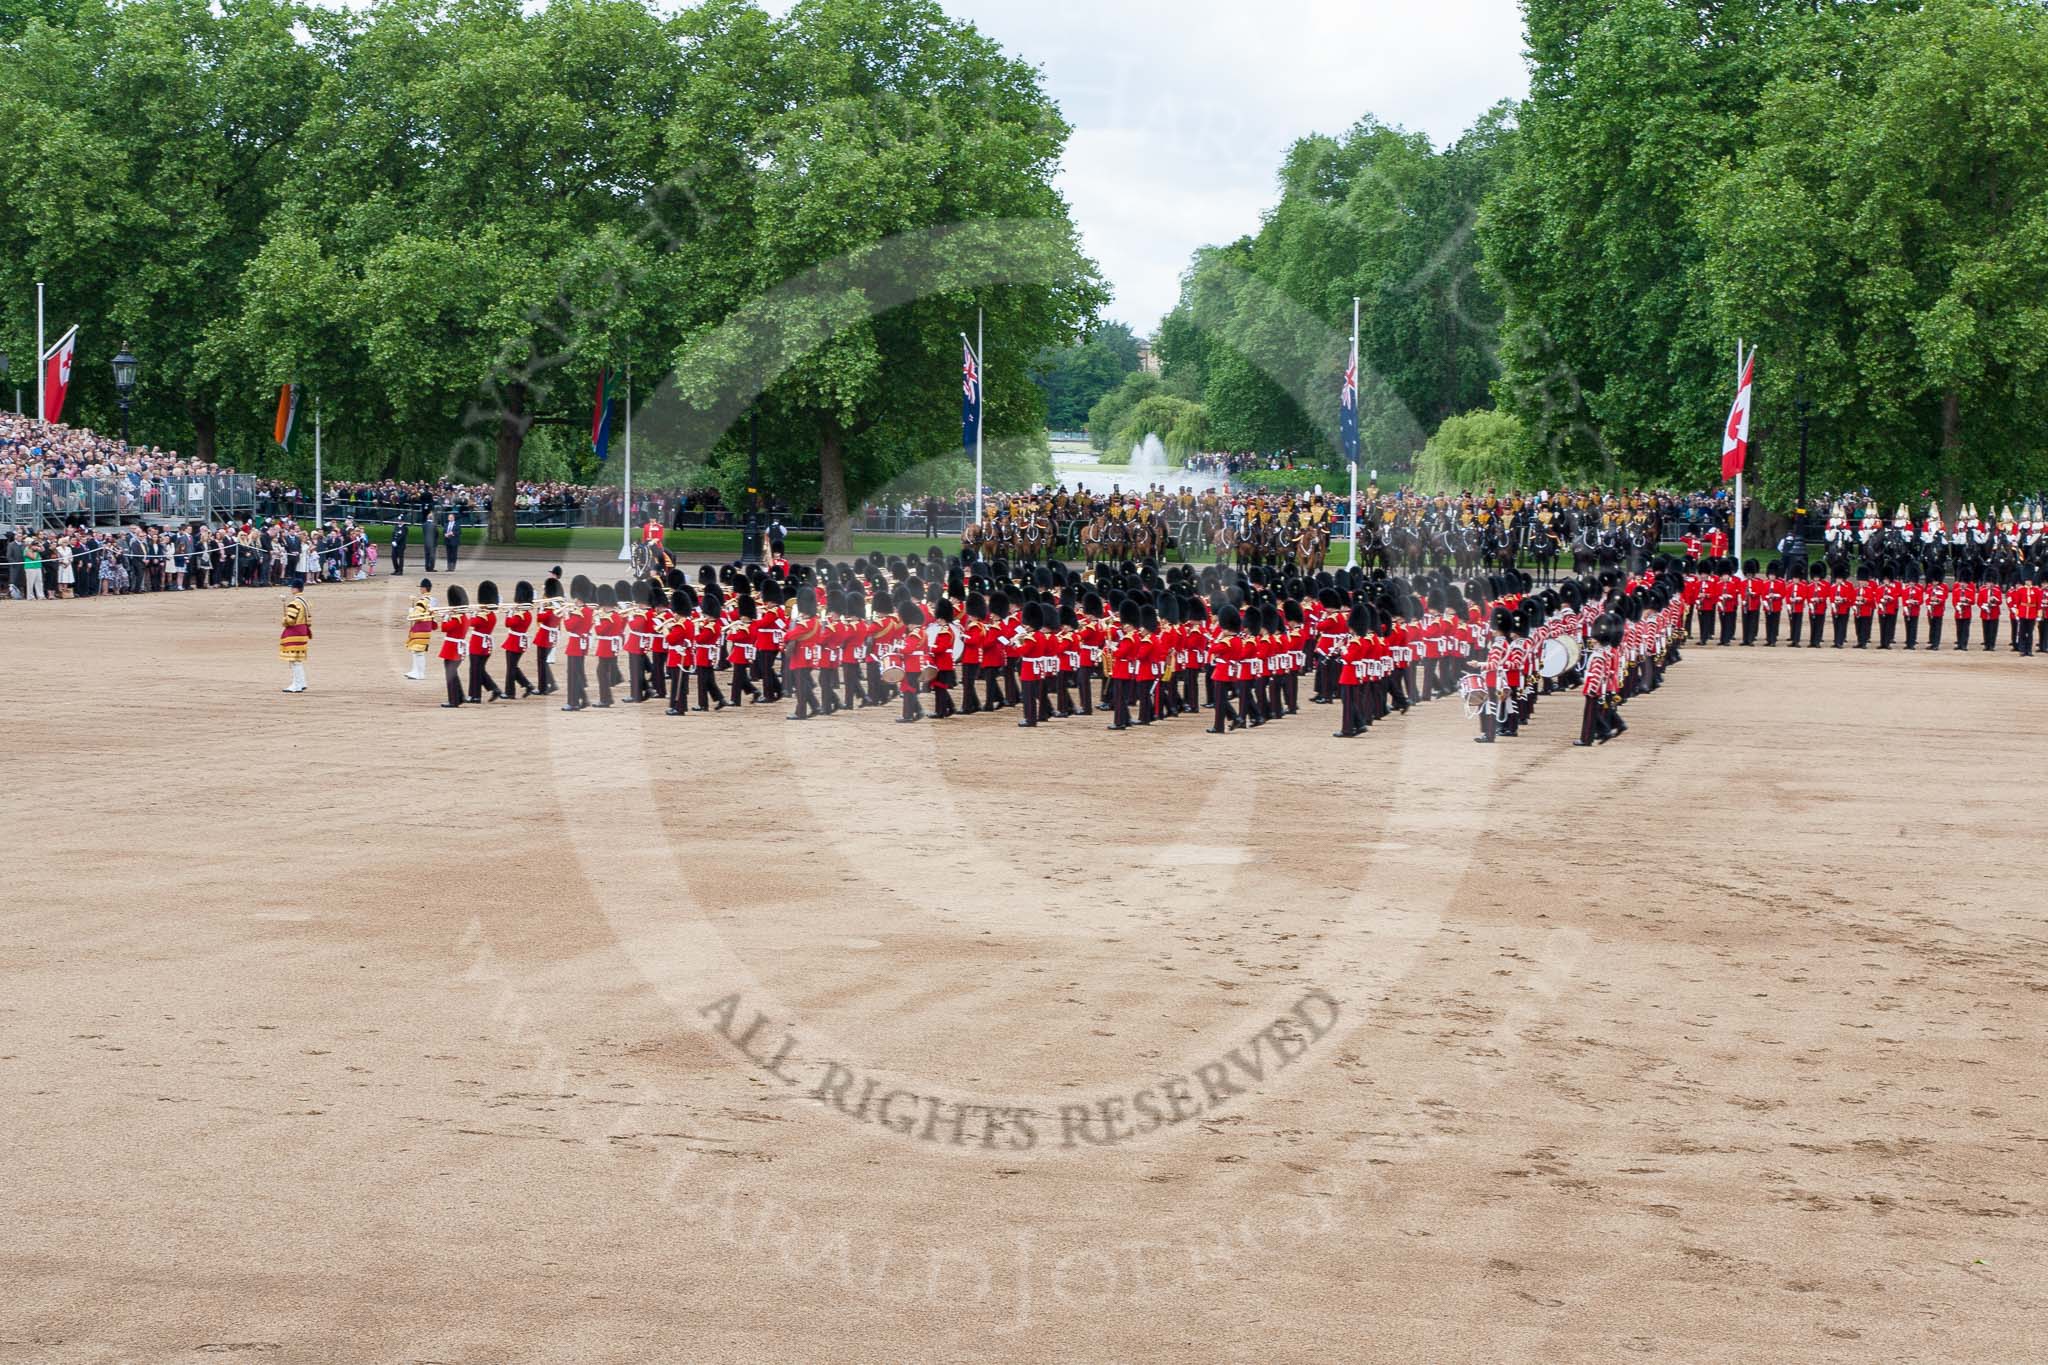 Trooping the Colour 2013: The five Massed Bands are playing the Grenadiers Slow March during the trooping of the Colour through the ranks. Image #493, 15 June 2013 11:25 Horse Guards Parade, London, UK